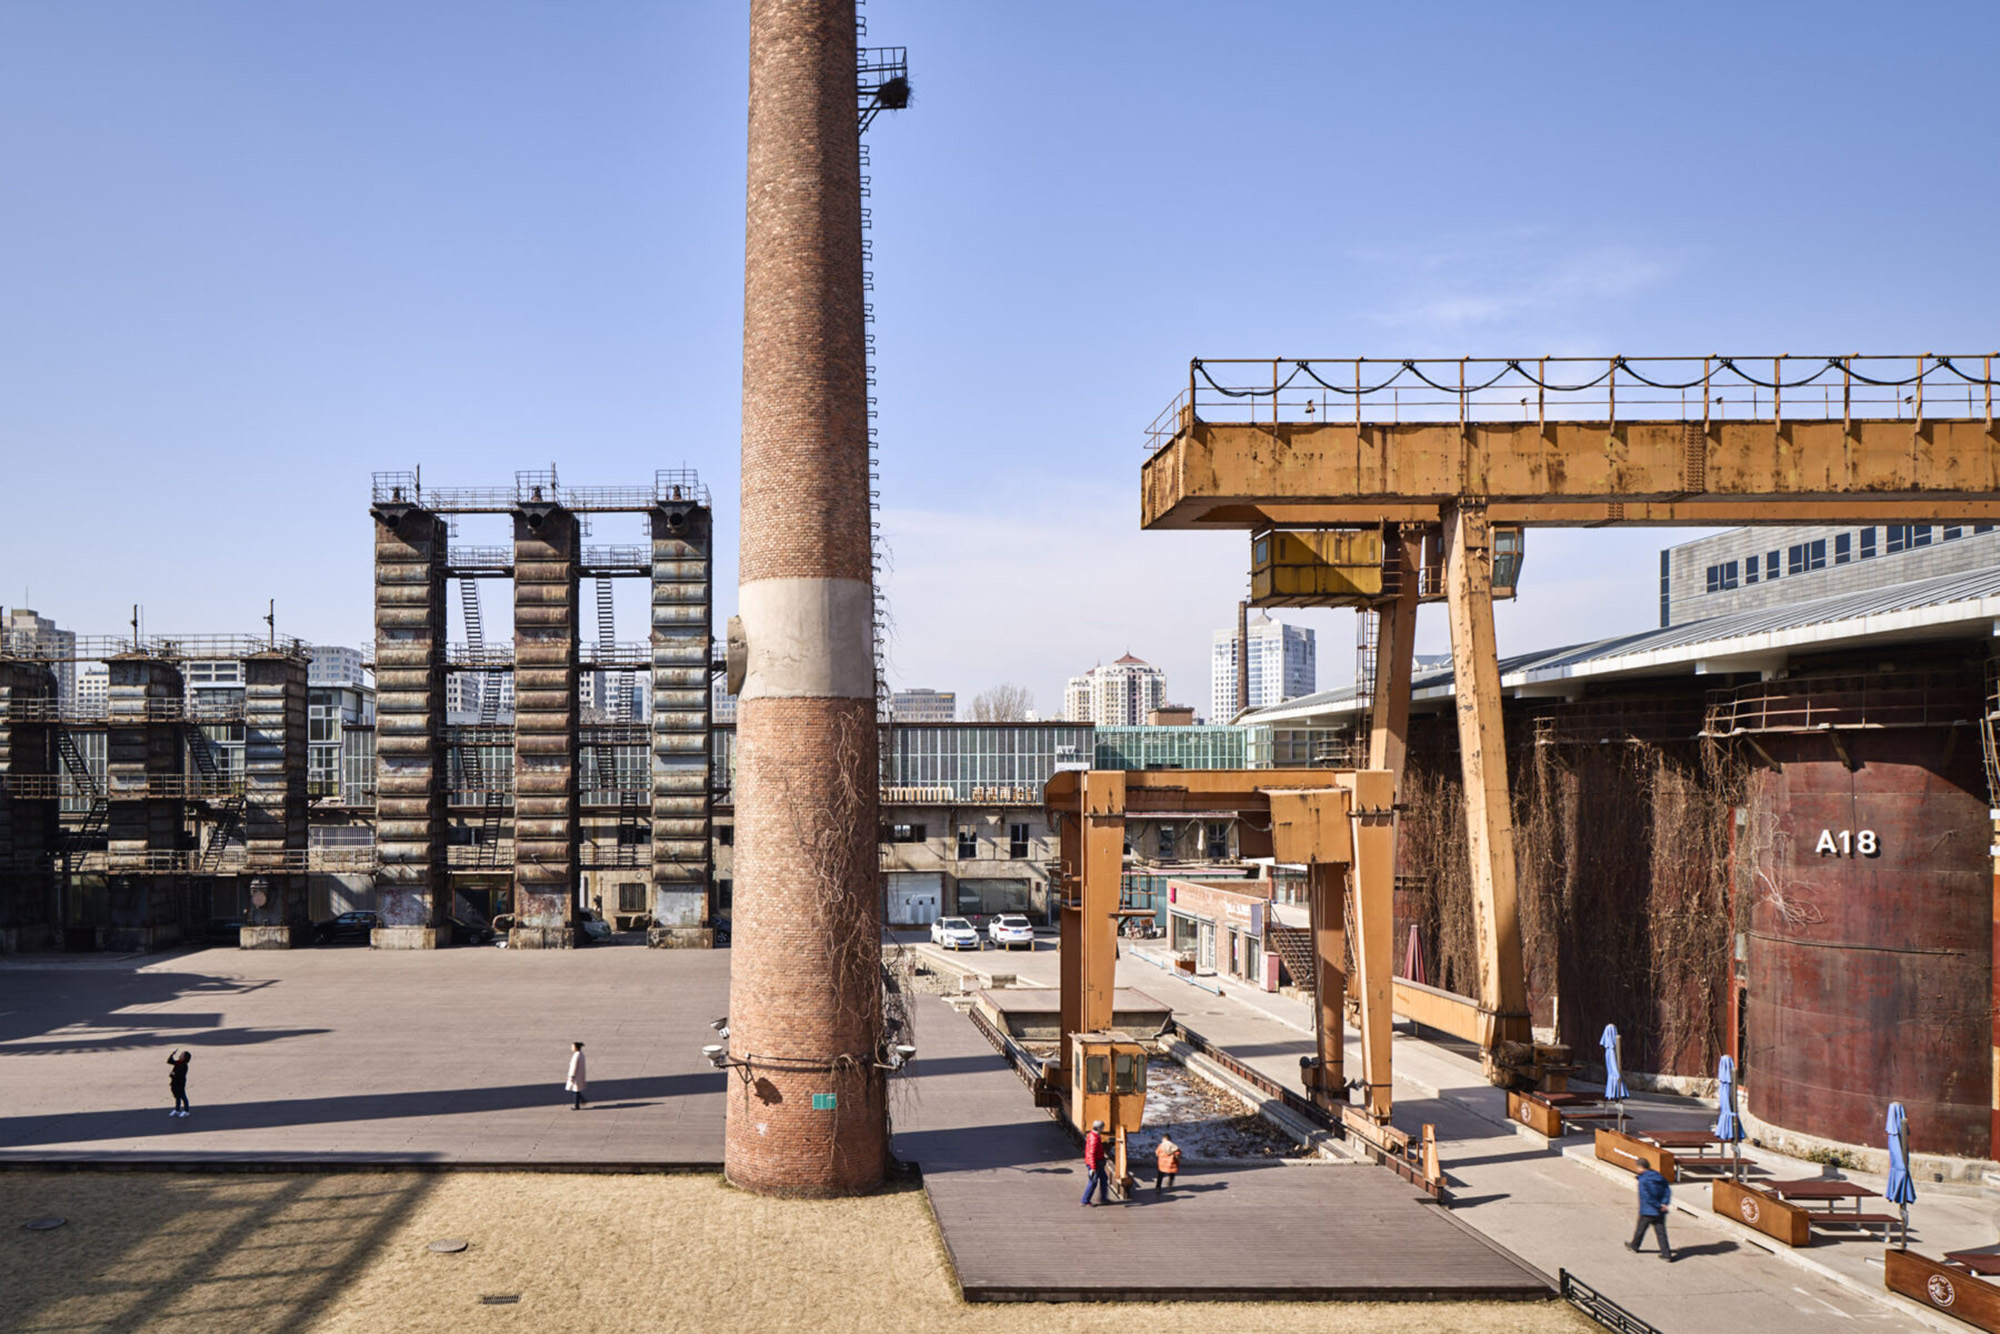 People walking around site with industrial features